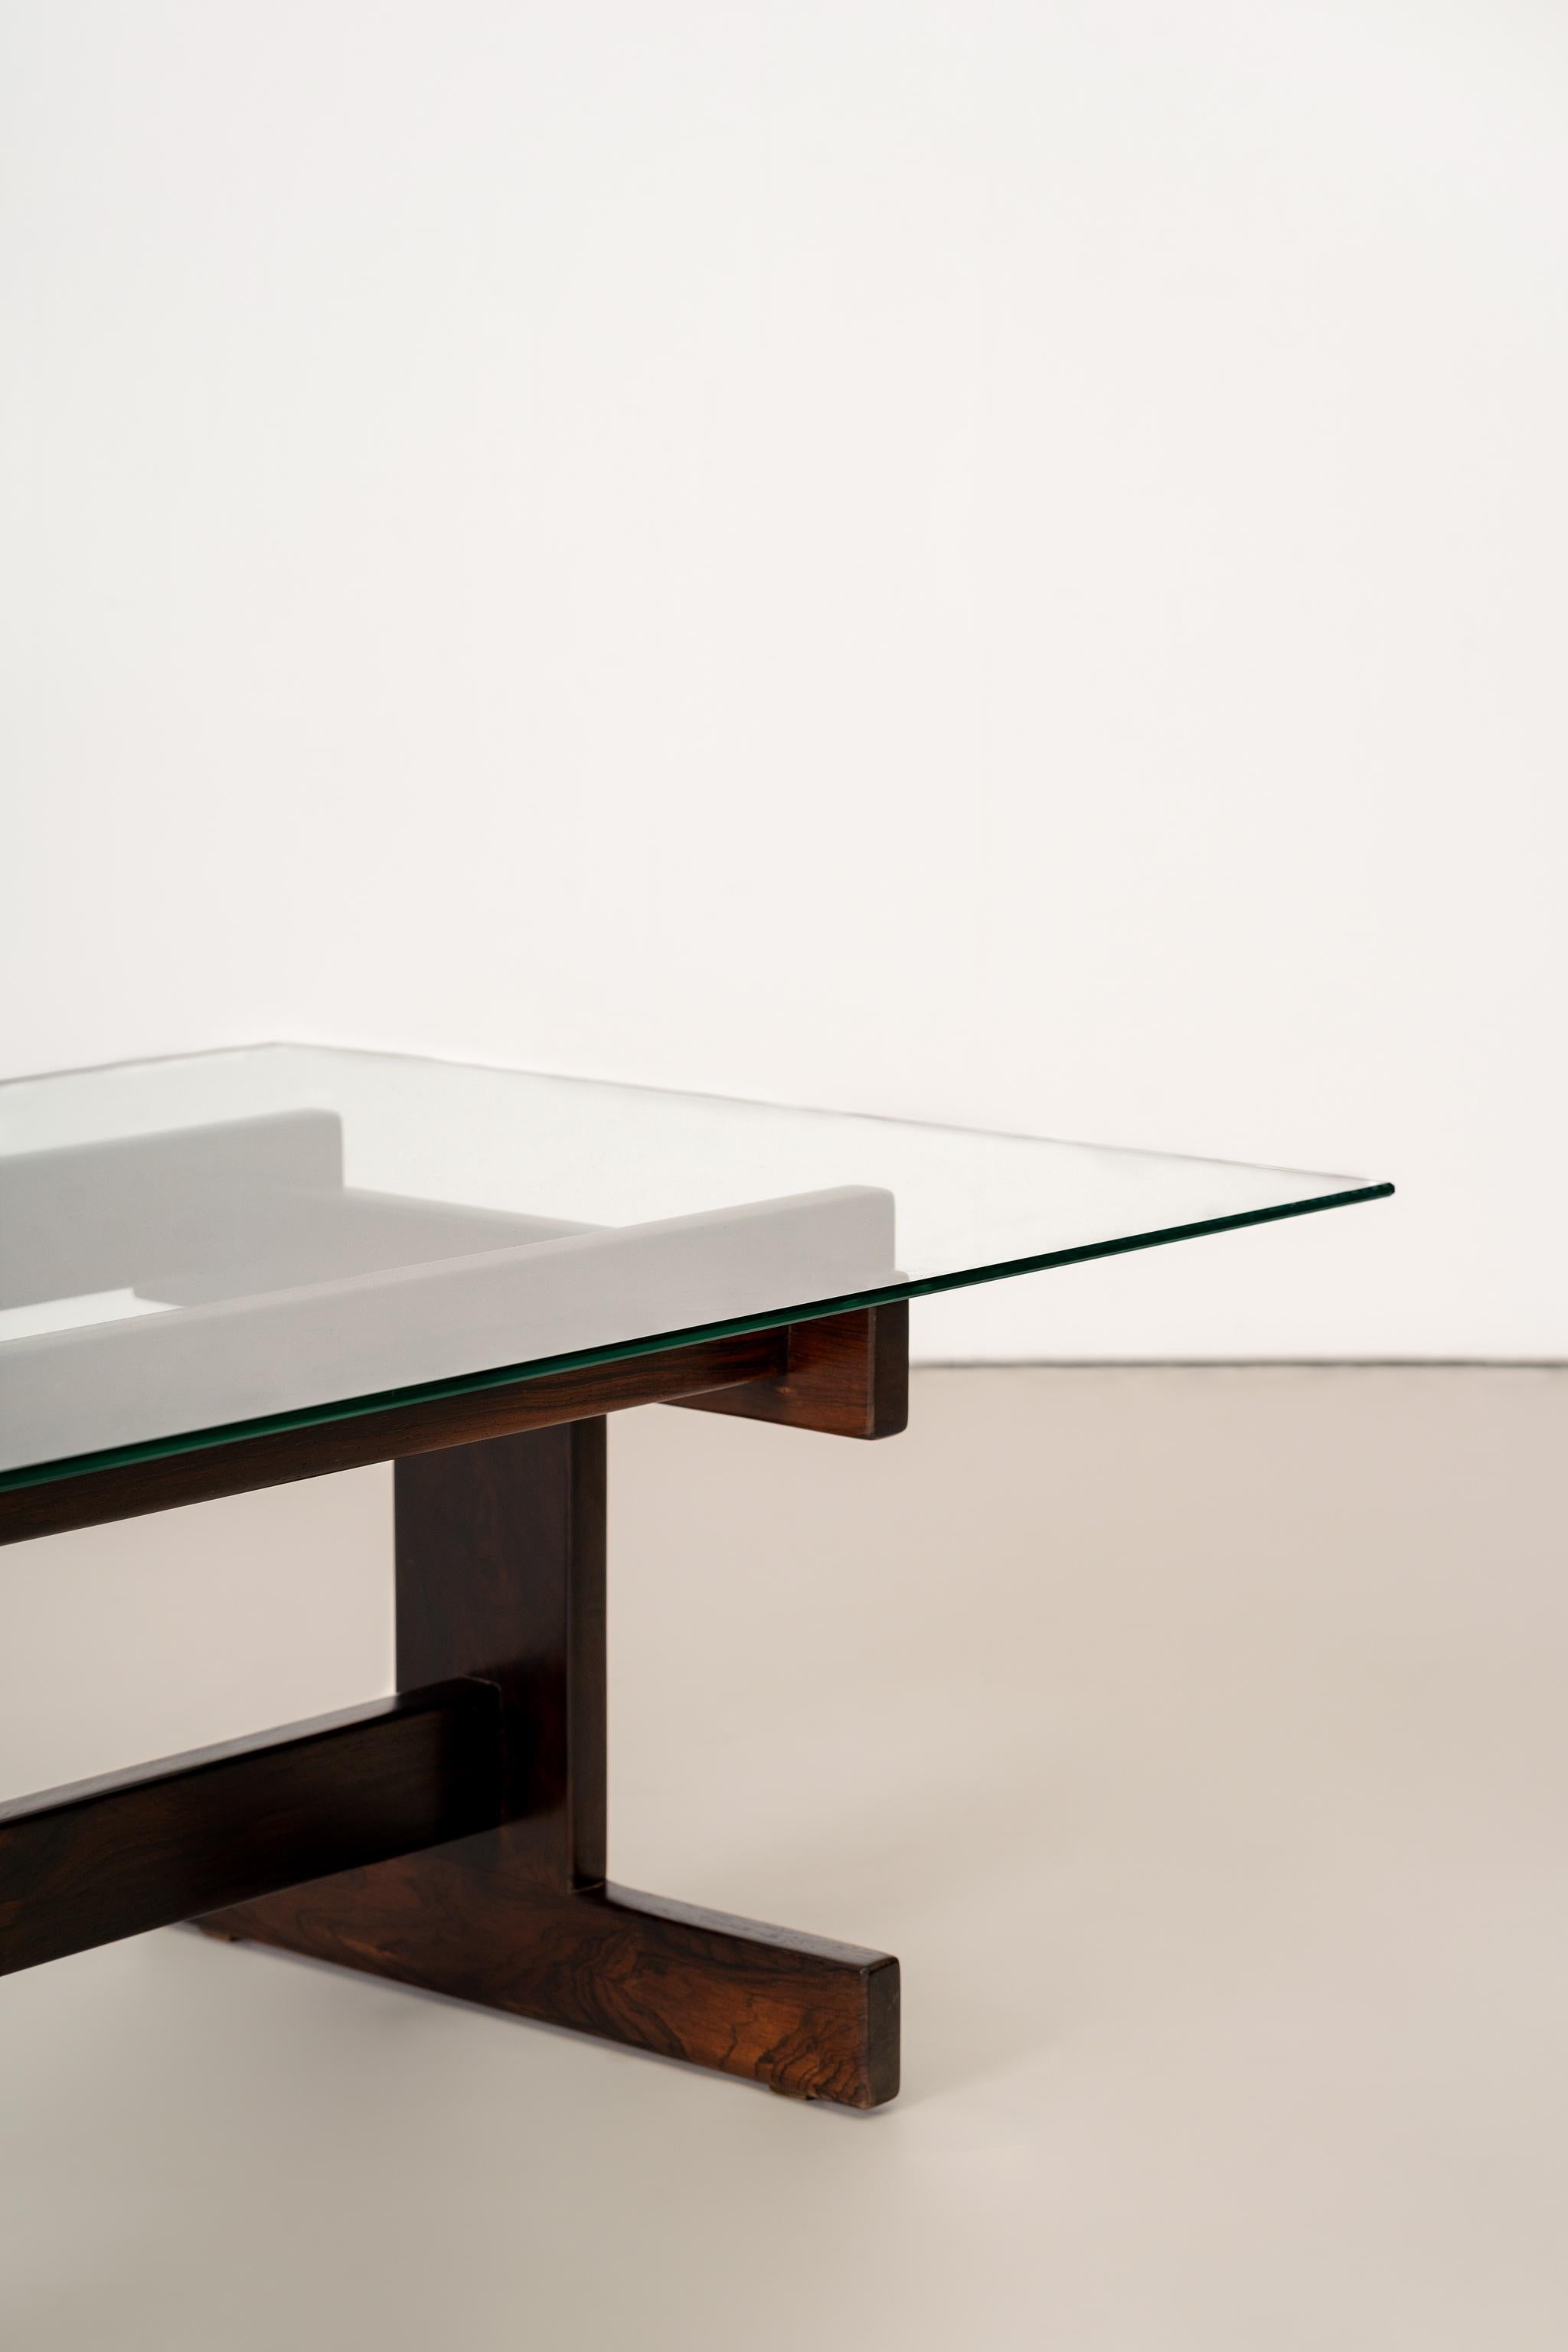 20th Century Brazilian Midcentury Center Table in Rosewood and Glass, c. 1970